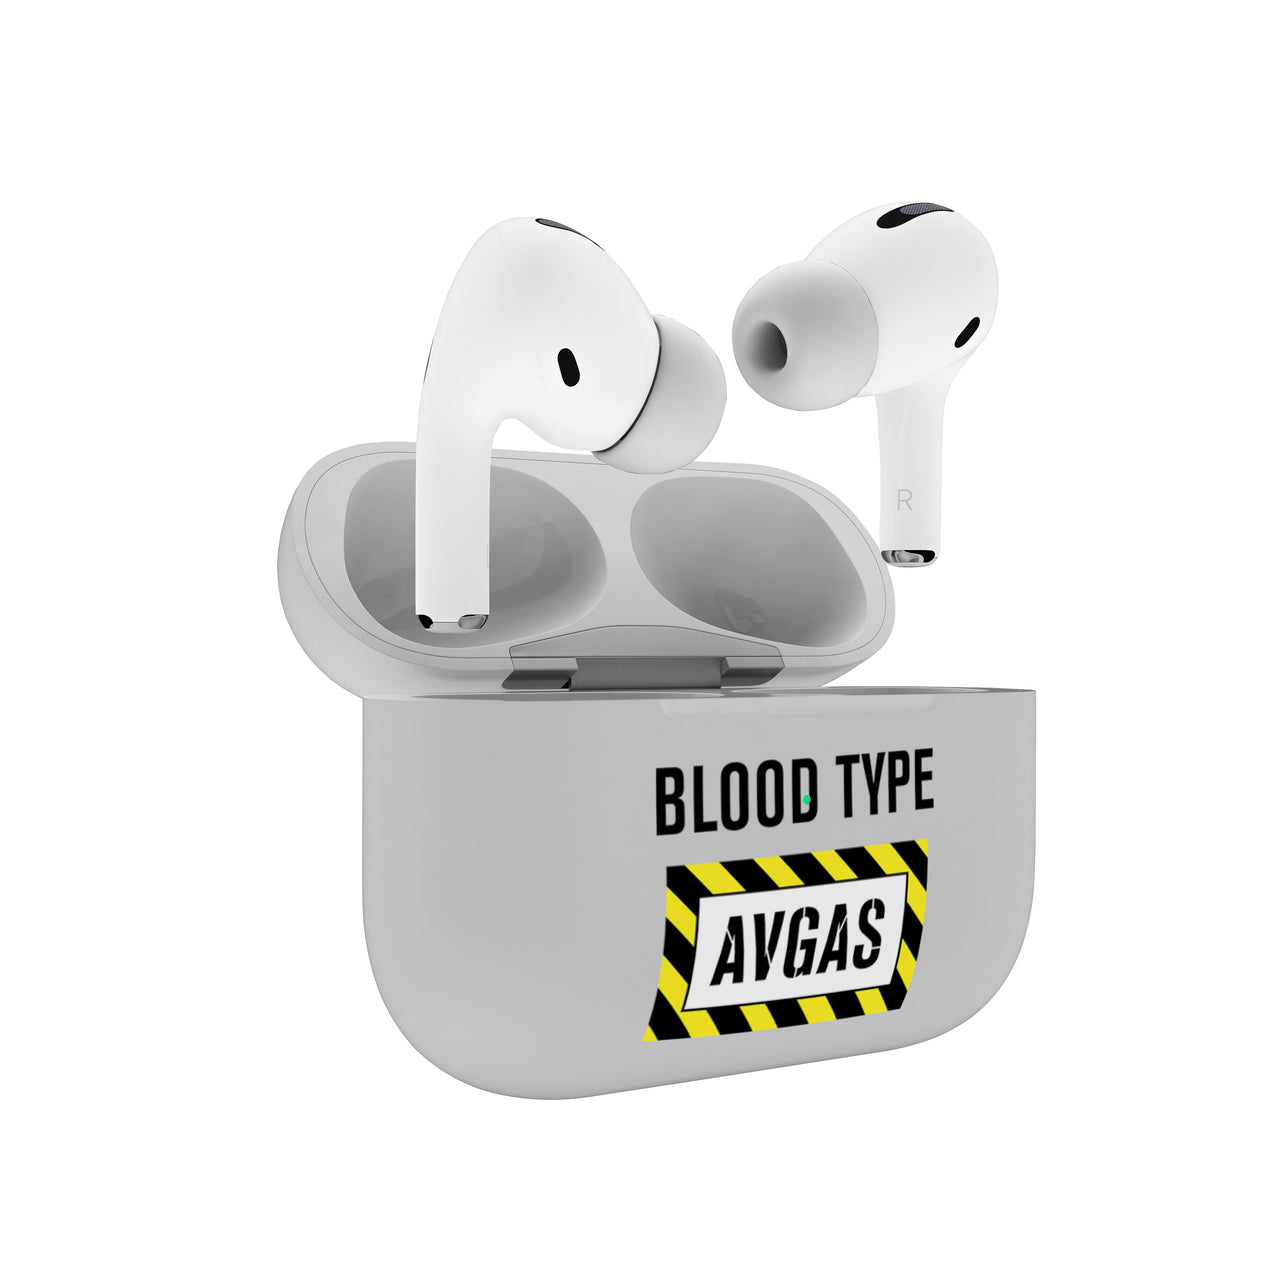 Blood Type AVGAS Designed AirPods "Pro" Cases